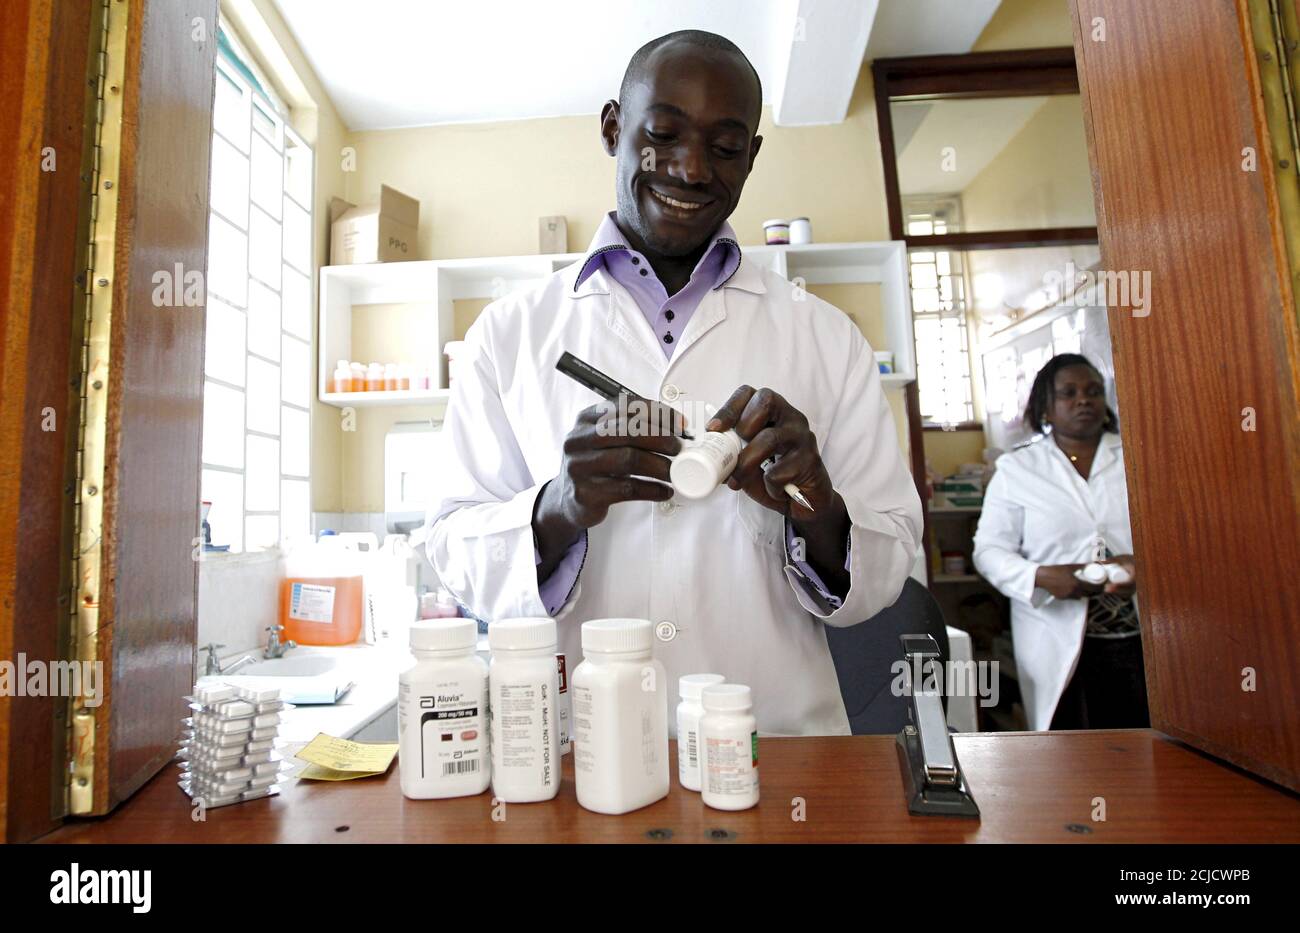 Michael Otieno, a pharmacist, dispenses anti-retroviral (ARV) drugs at the Mater Hospital in Kenya's capital Nairobi, September 10, 2015. Most of the 3,000 patients at Mater Hospital's Comprehensive Care Clinic, dedicated to HIV/AIDS treatment, come from nearby shanty towns. In Kenya, HIV prevalence among adults has almost halved since the mid-1990s to 5.3 percent in 2014, according to UNAIDS. Yet HIV/AIDS remains the leading cause of death in Kenya, responsible for nearly three in 10 deaths in the east African country, where 1.6 million Kenyans are infected, government data in 2014 shows. Pic Stock Photo